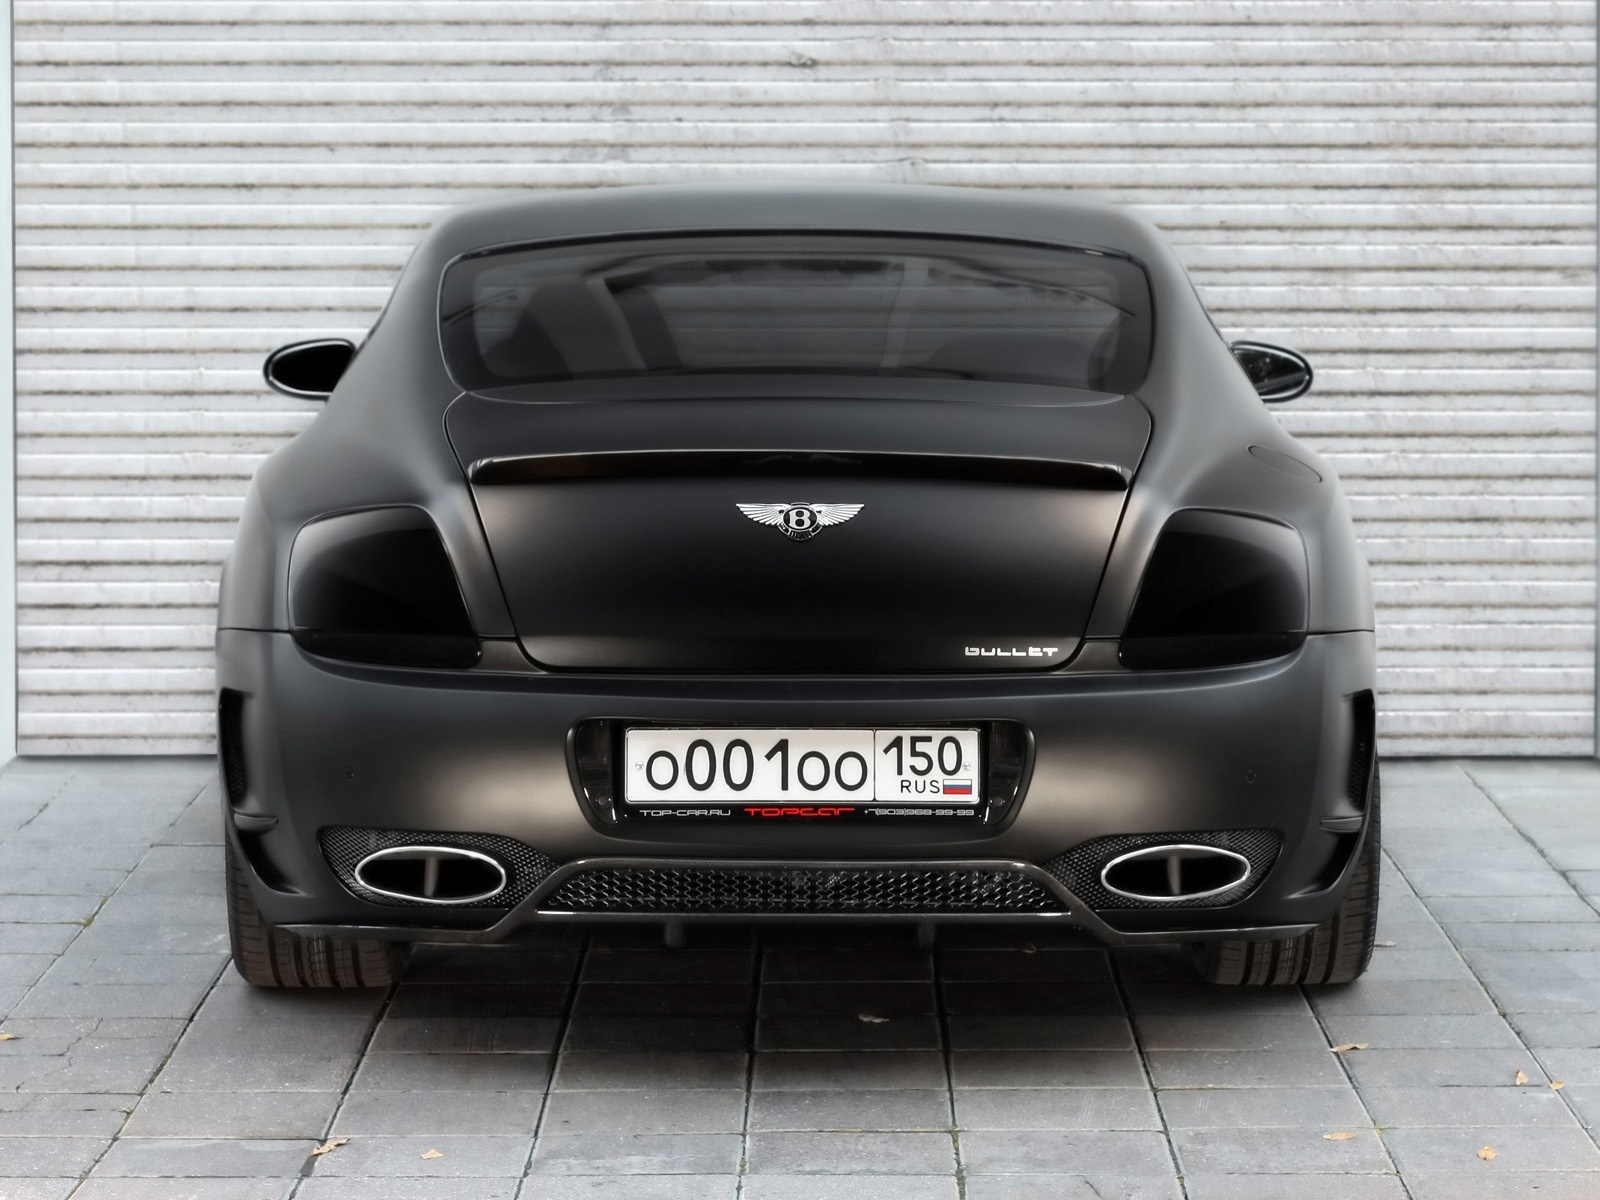 2010 Bentley Continental GT Bullet Rear for 1600 x 1200 resolution